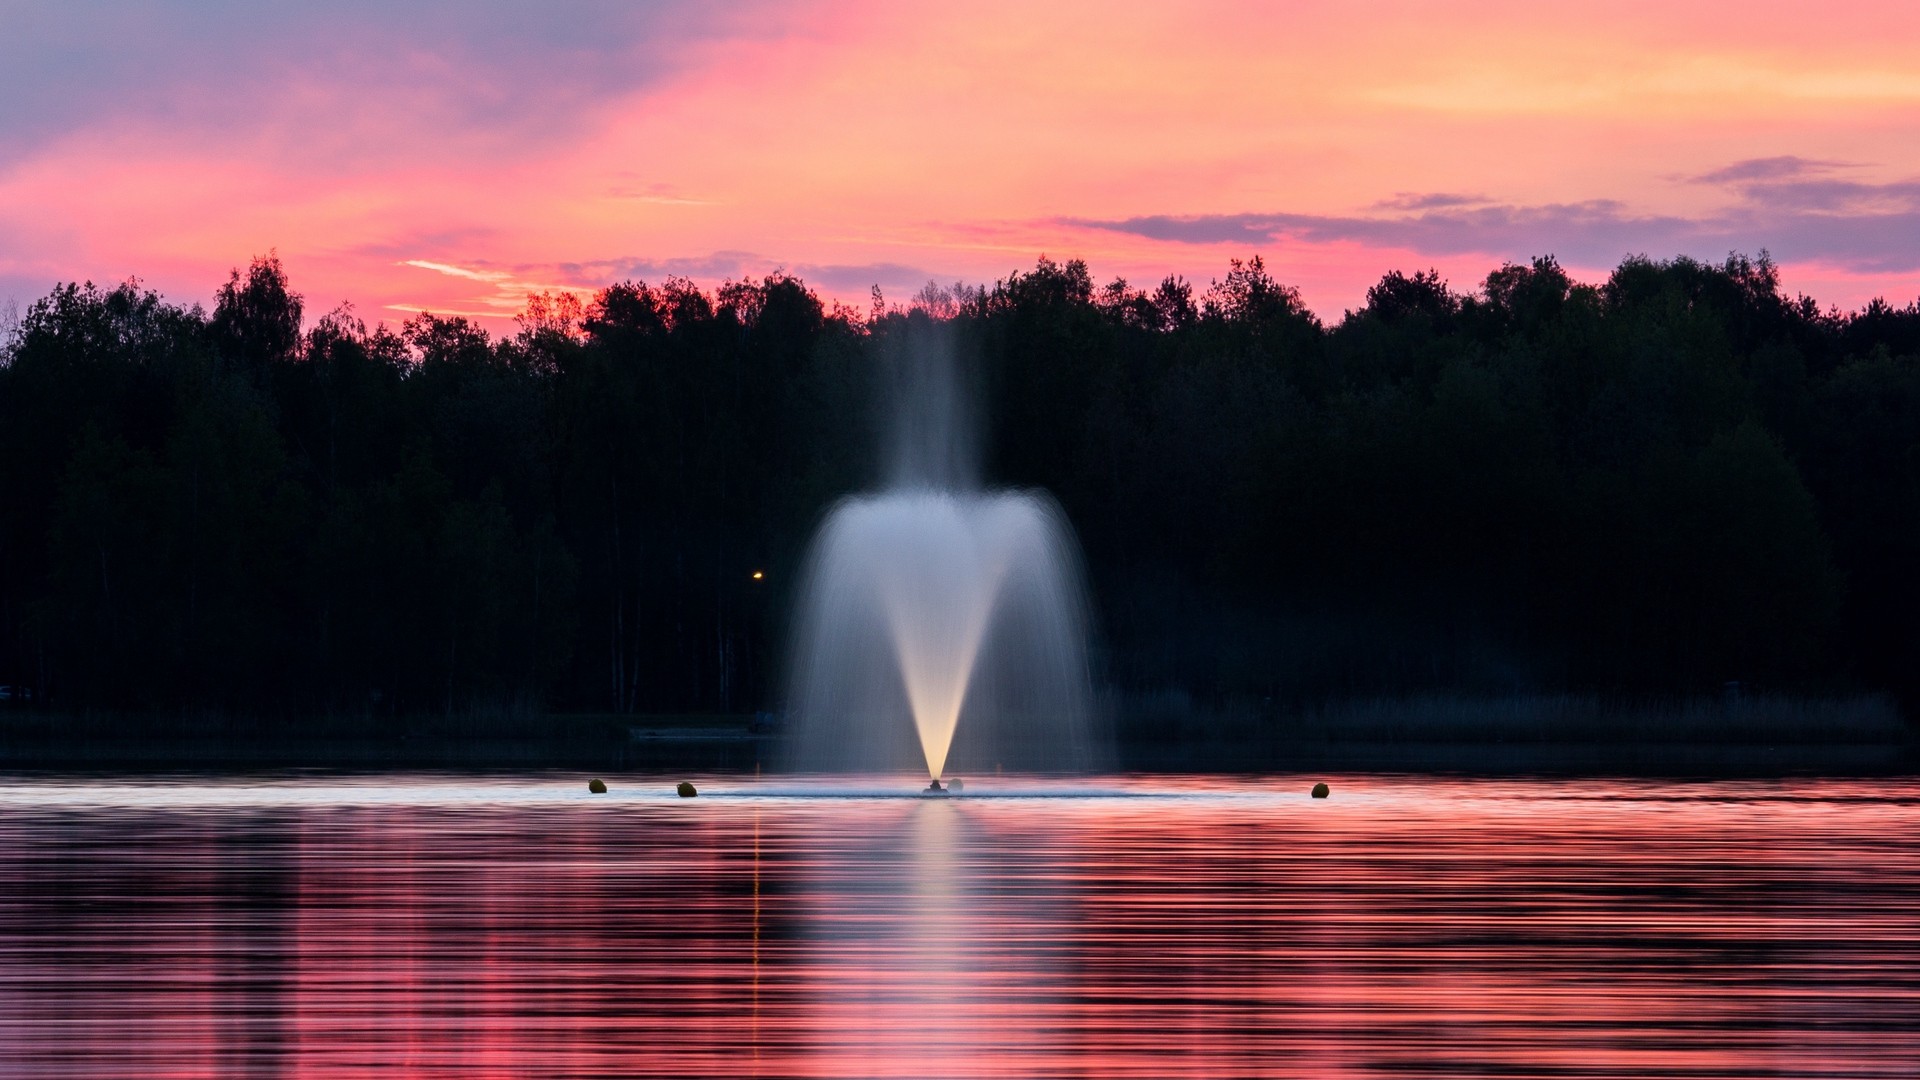 1920x1080 wallpapers: fountain, lake, sunset, trees (image)